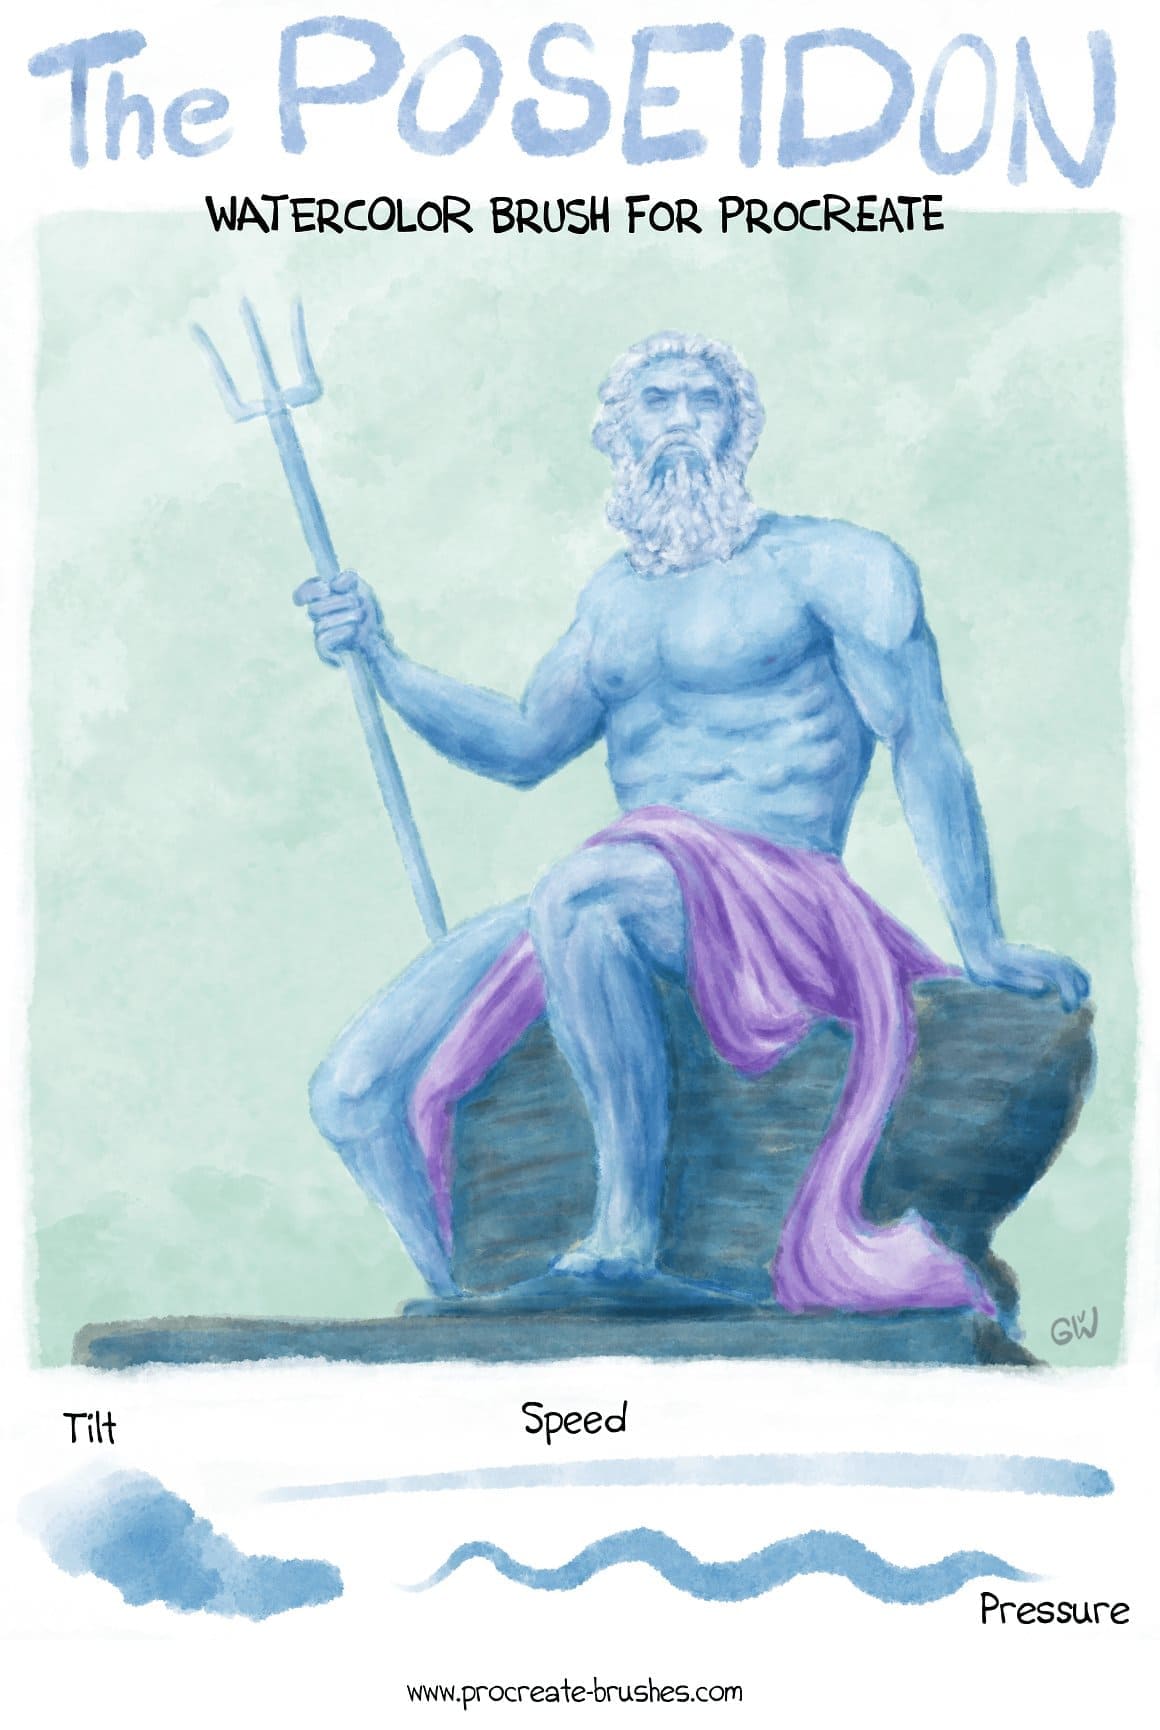 Poseidon is painted with a huge trident.